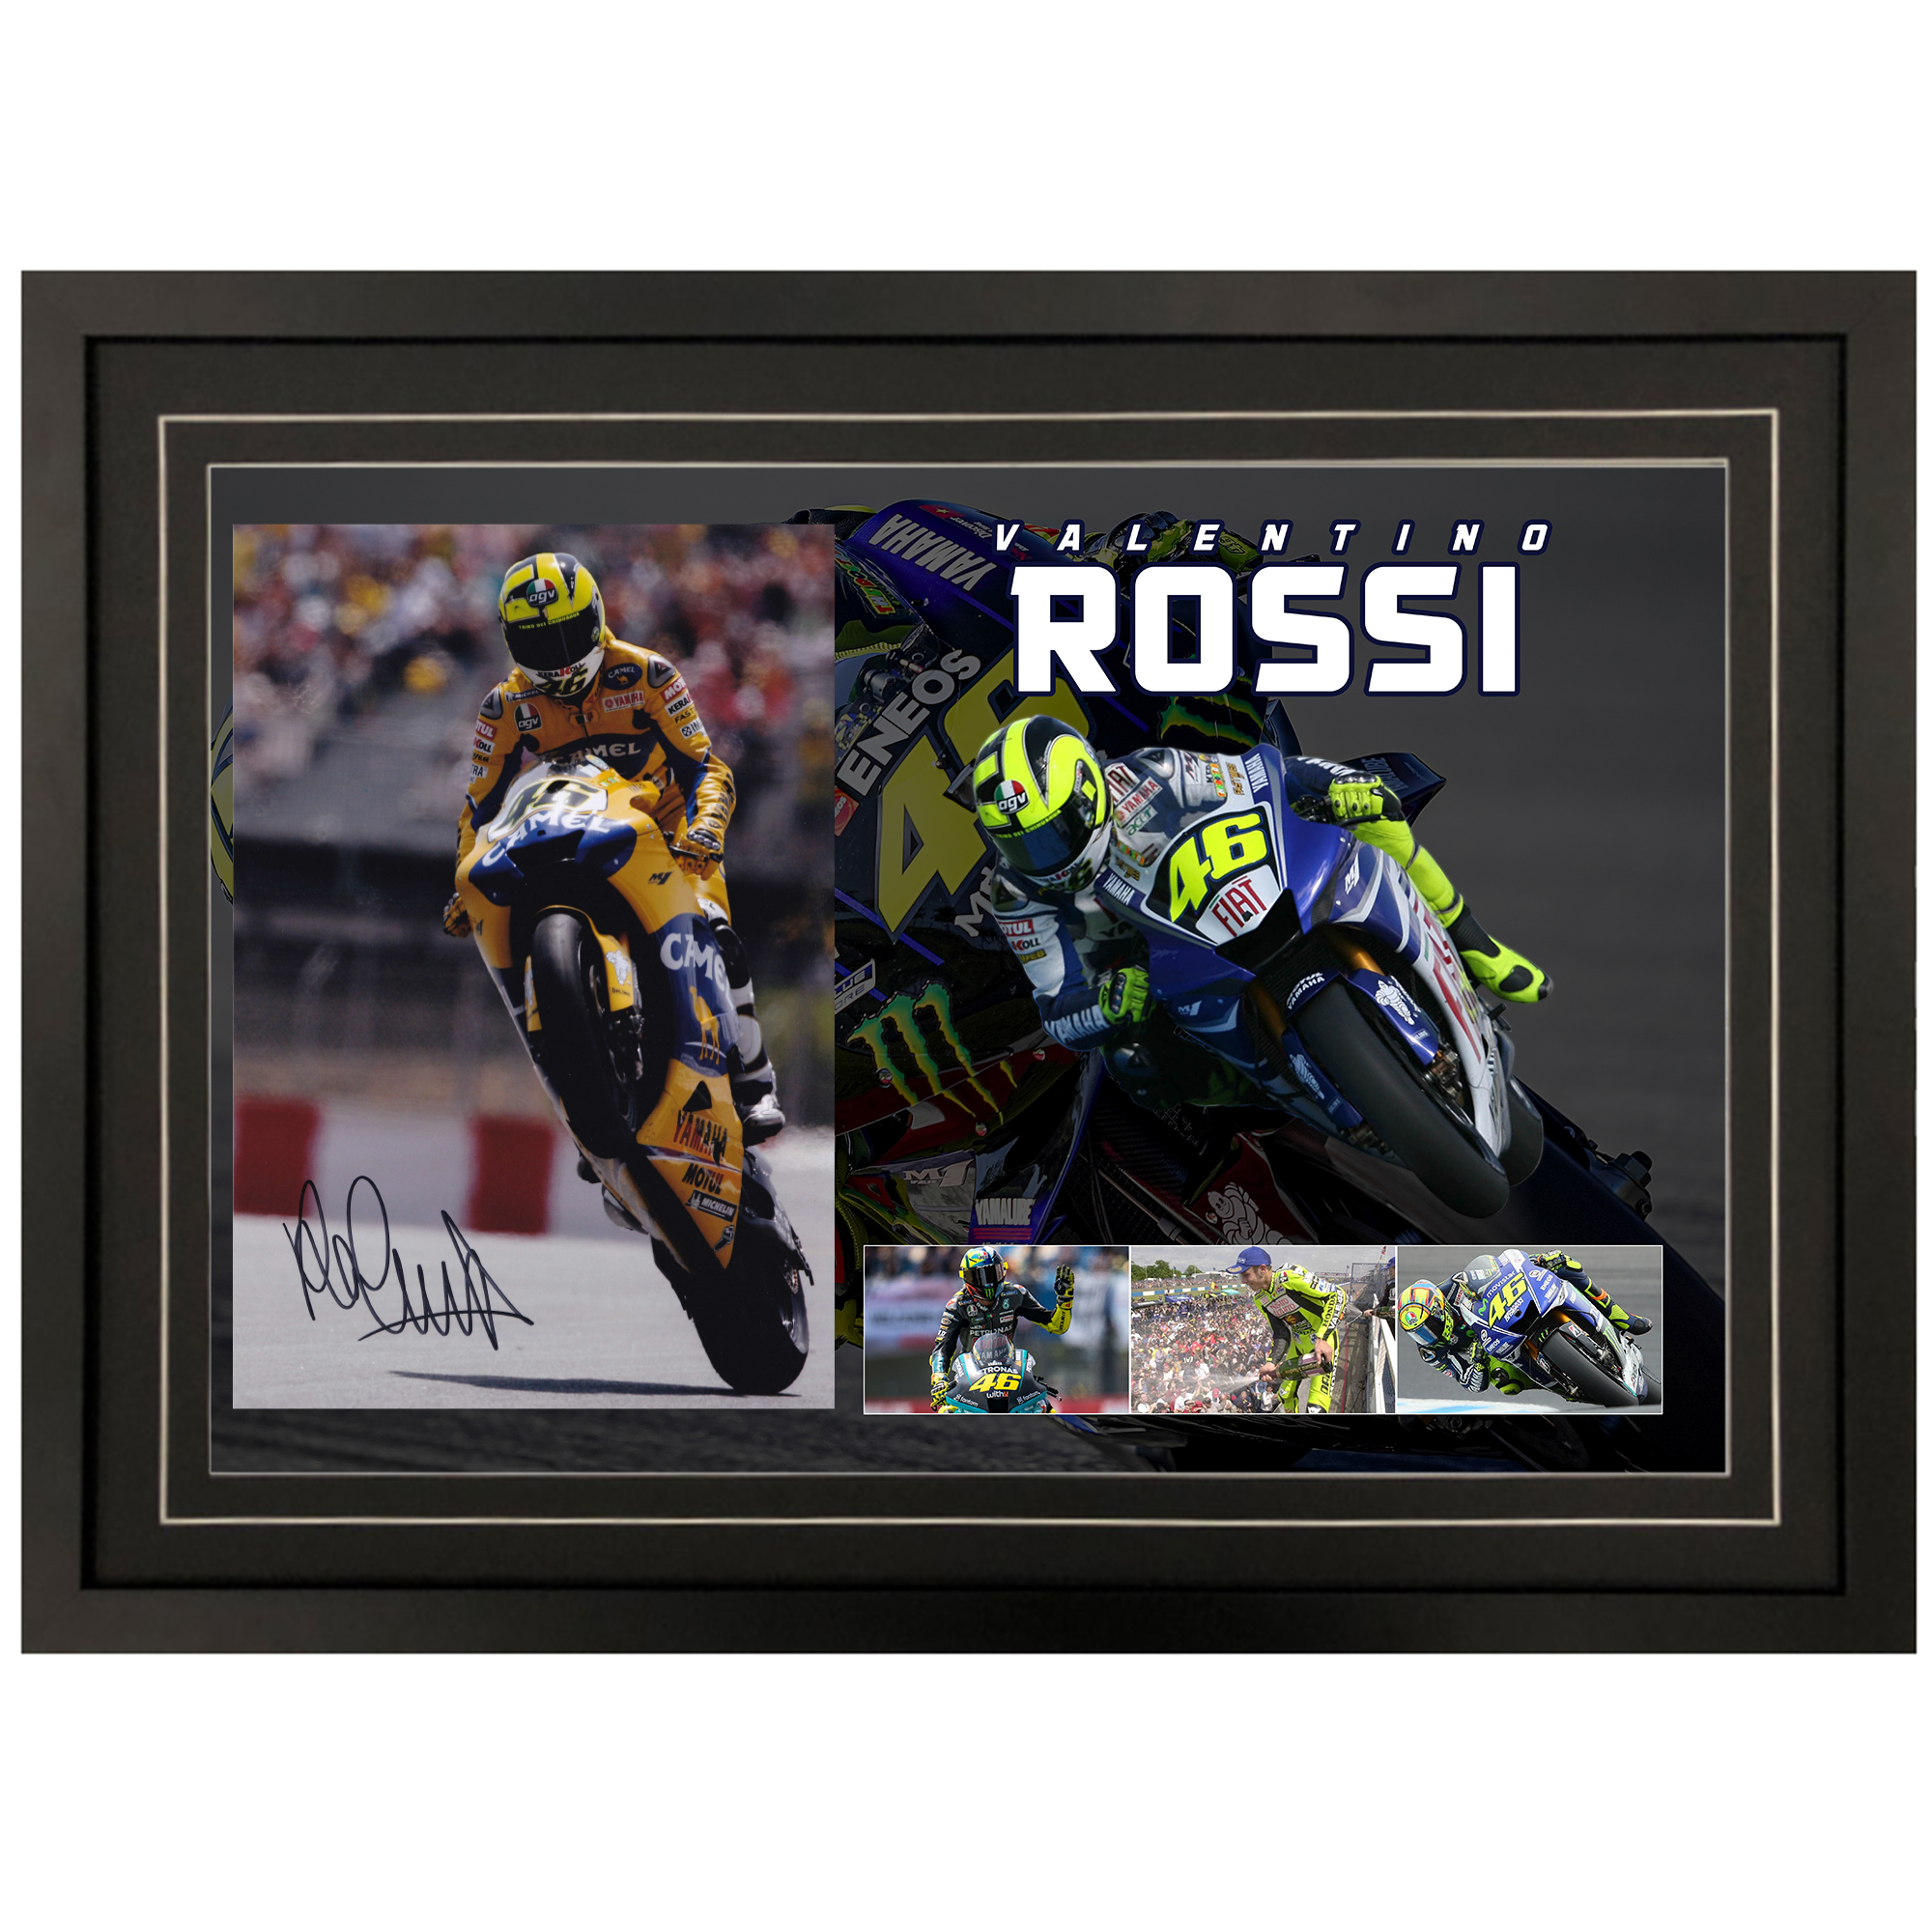 Motorsport – Valentino Rossi Signed and Framed 8×12 Photograph